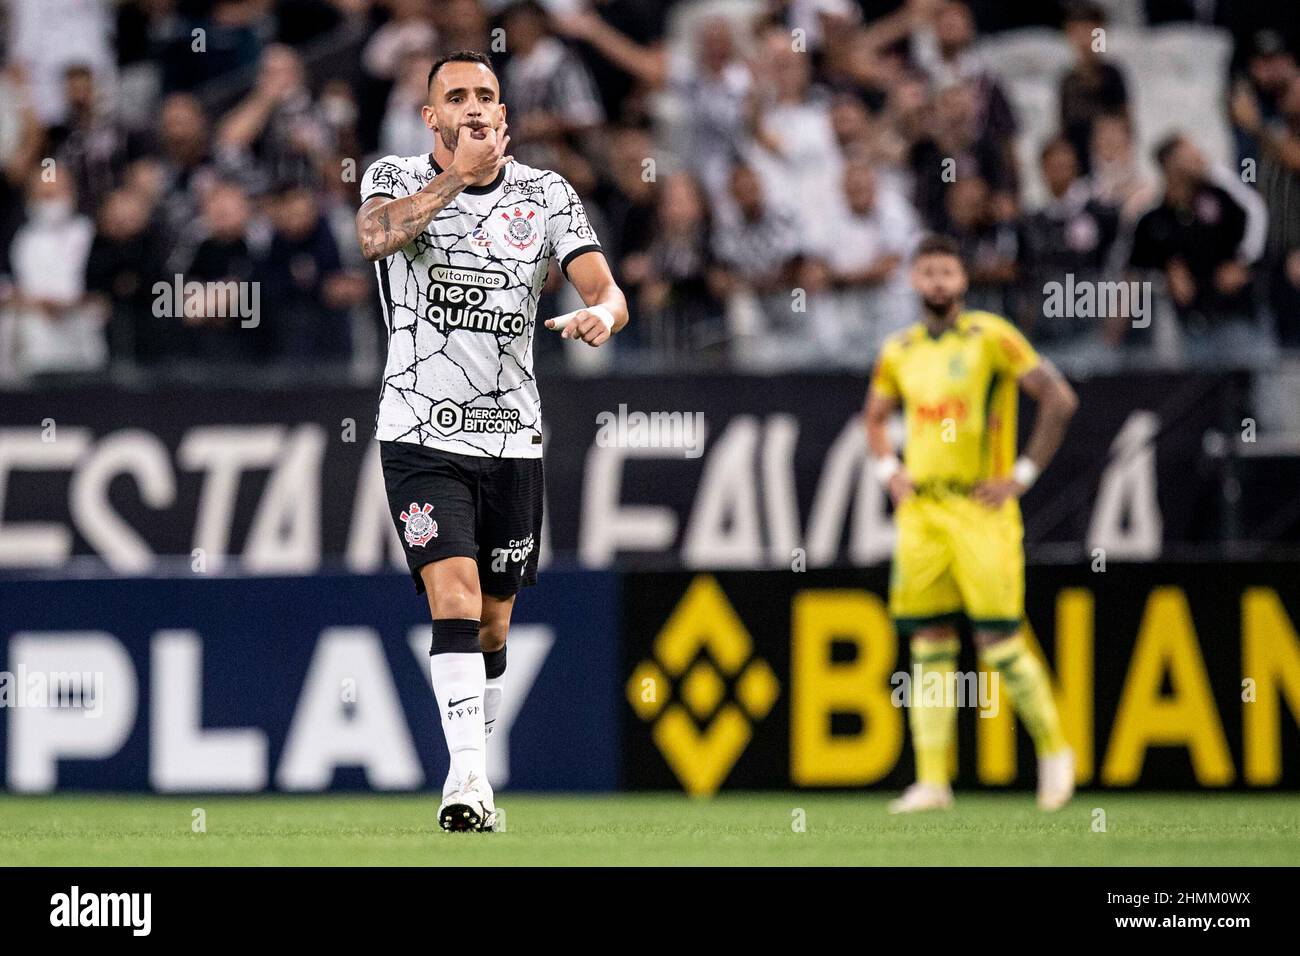 SÃO PAULO, SP - 10.02.2022: CORINTHIANS X MIRASSOL - Renato Augusto during the game between Corinthians and Mirassol held at Neo Química Arena in São Paulo, SP. The match is valid for the 5th round of Paulistão 2022. (Photo: Marco Galvão/Fotoarena) Stock Photo